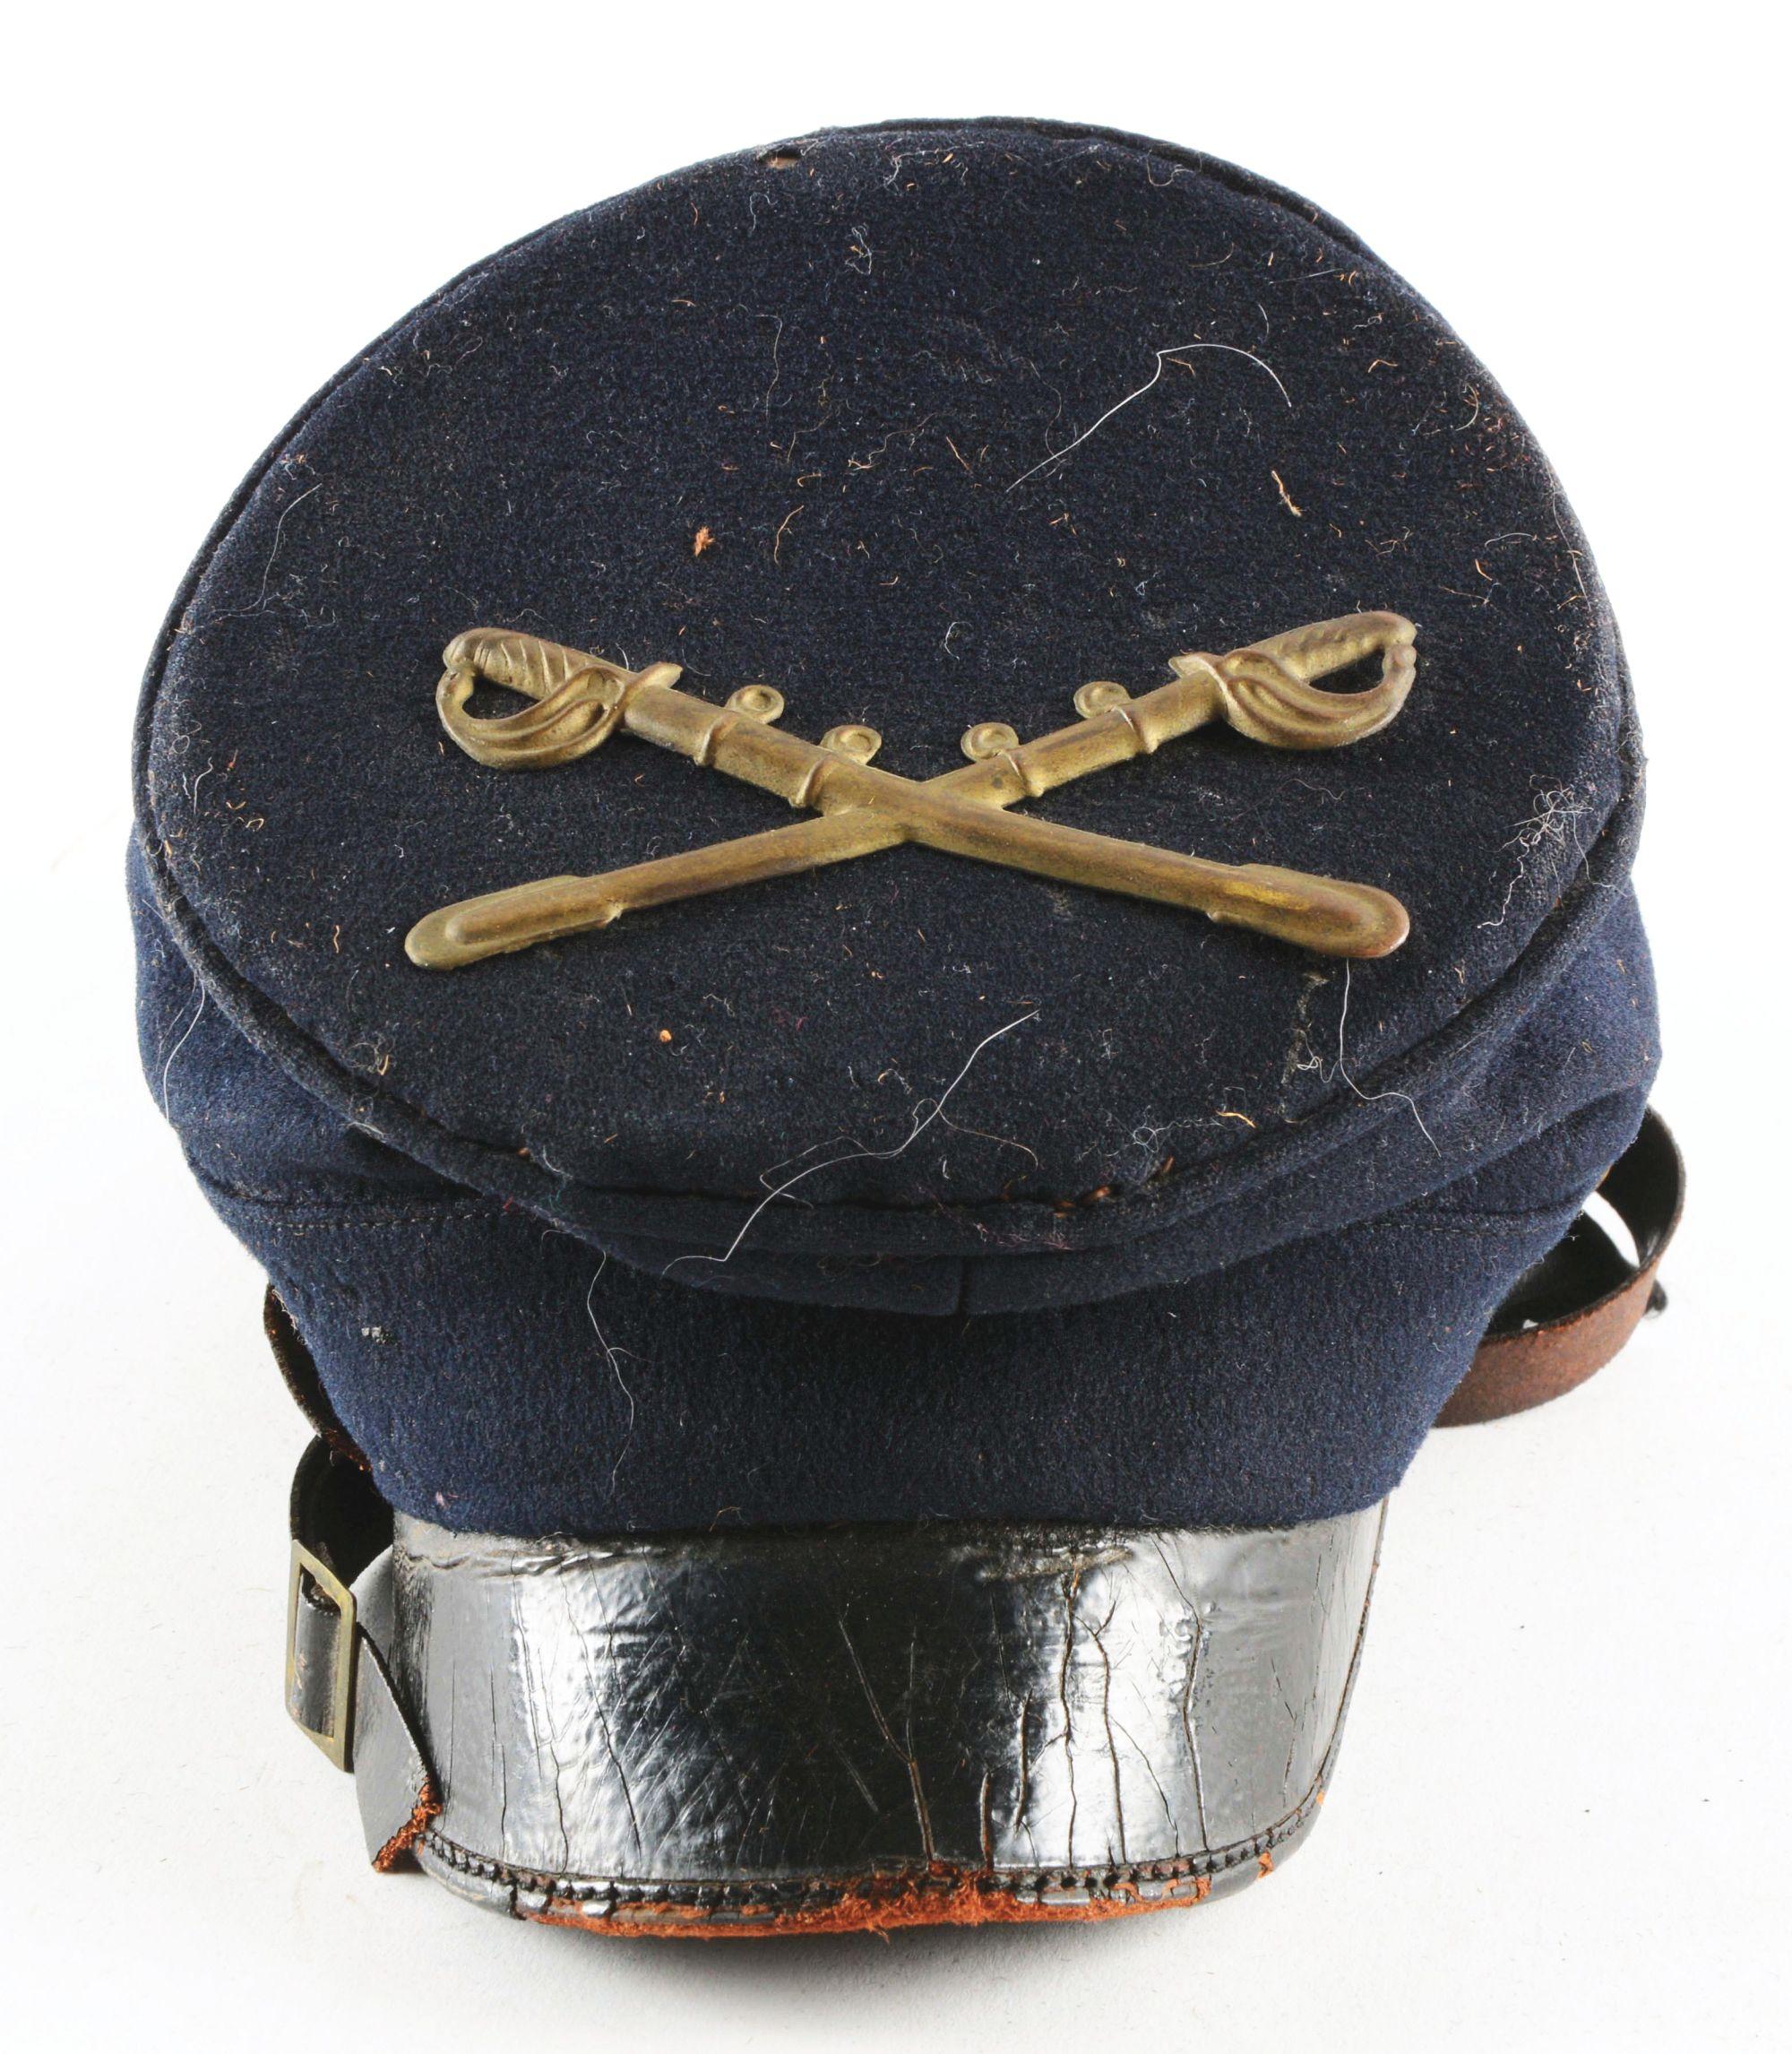 LOT OF 2: CIVIL WAR ARTILLERY SHELL JACKET AND FORAGE CAP.